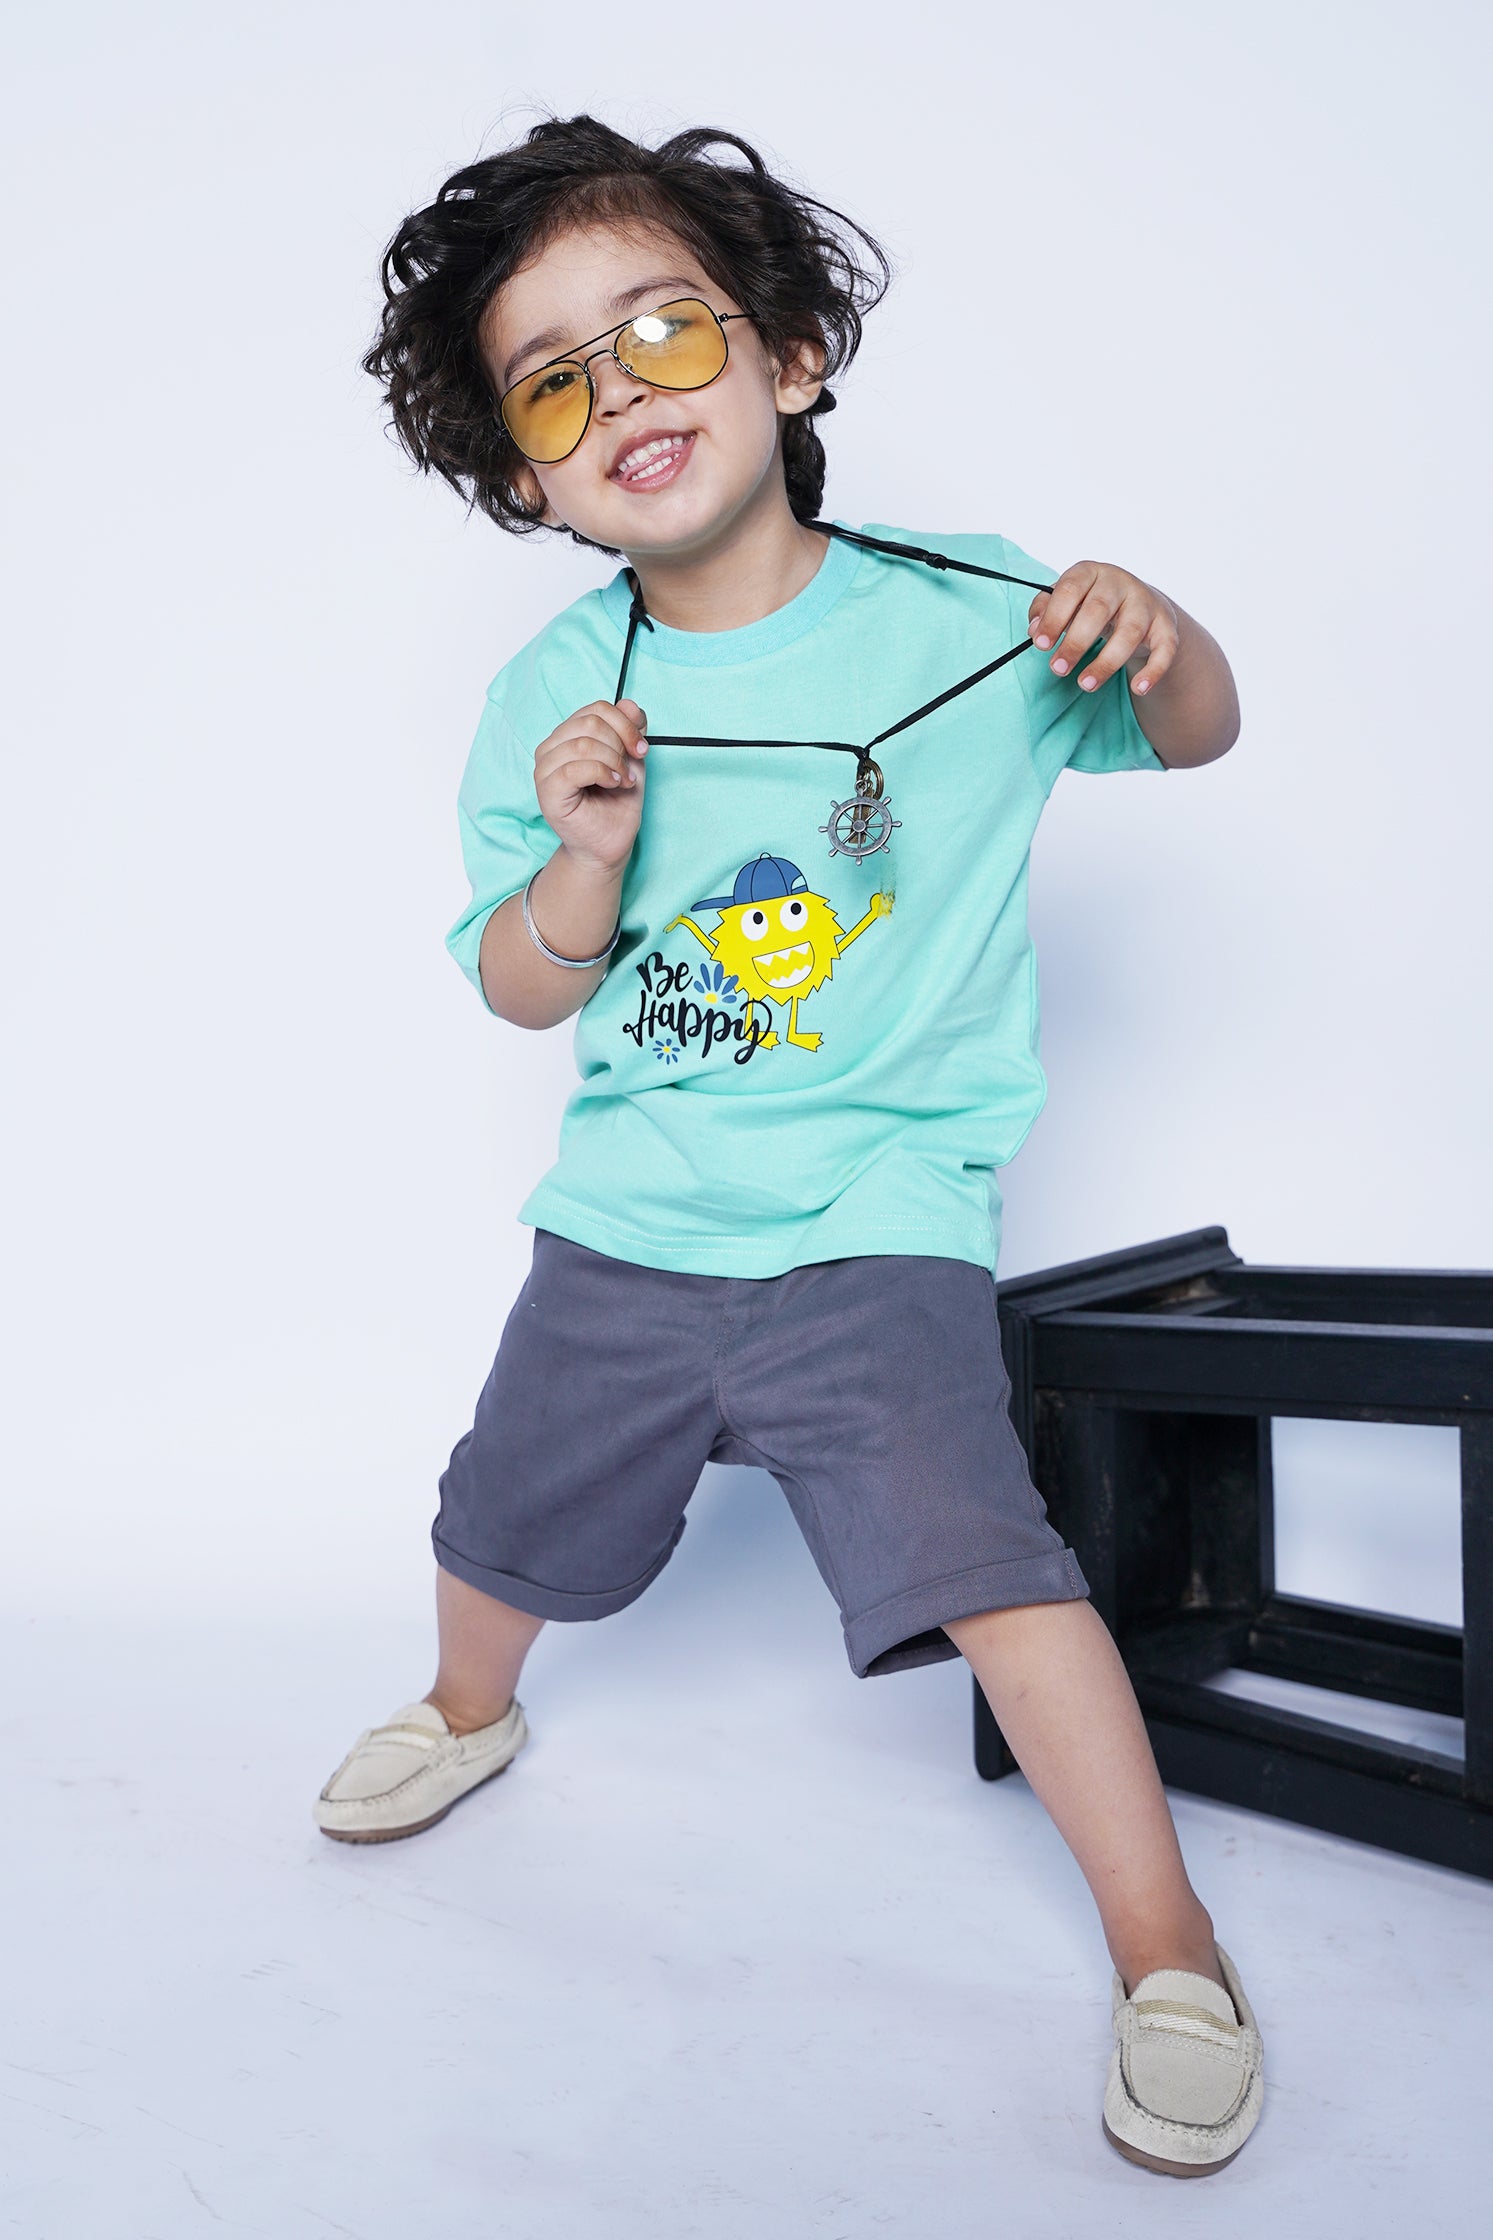 KIDS T-SHIRT WITH "BE HAPPY" PRINTING